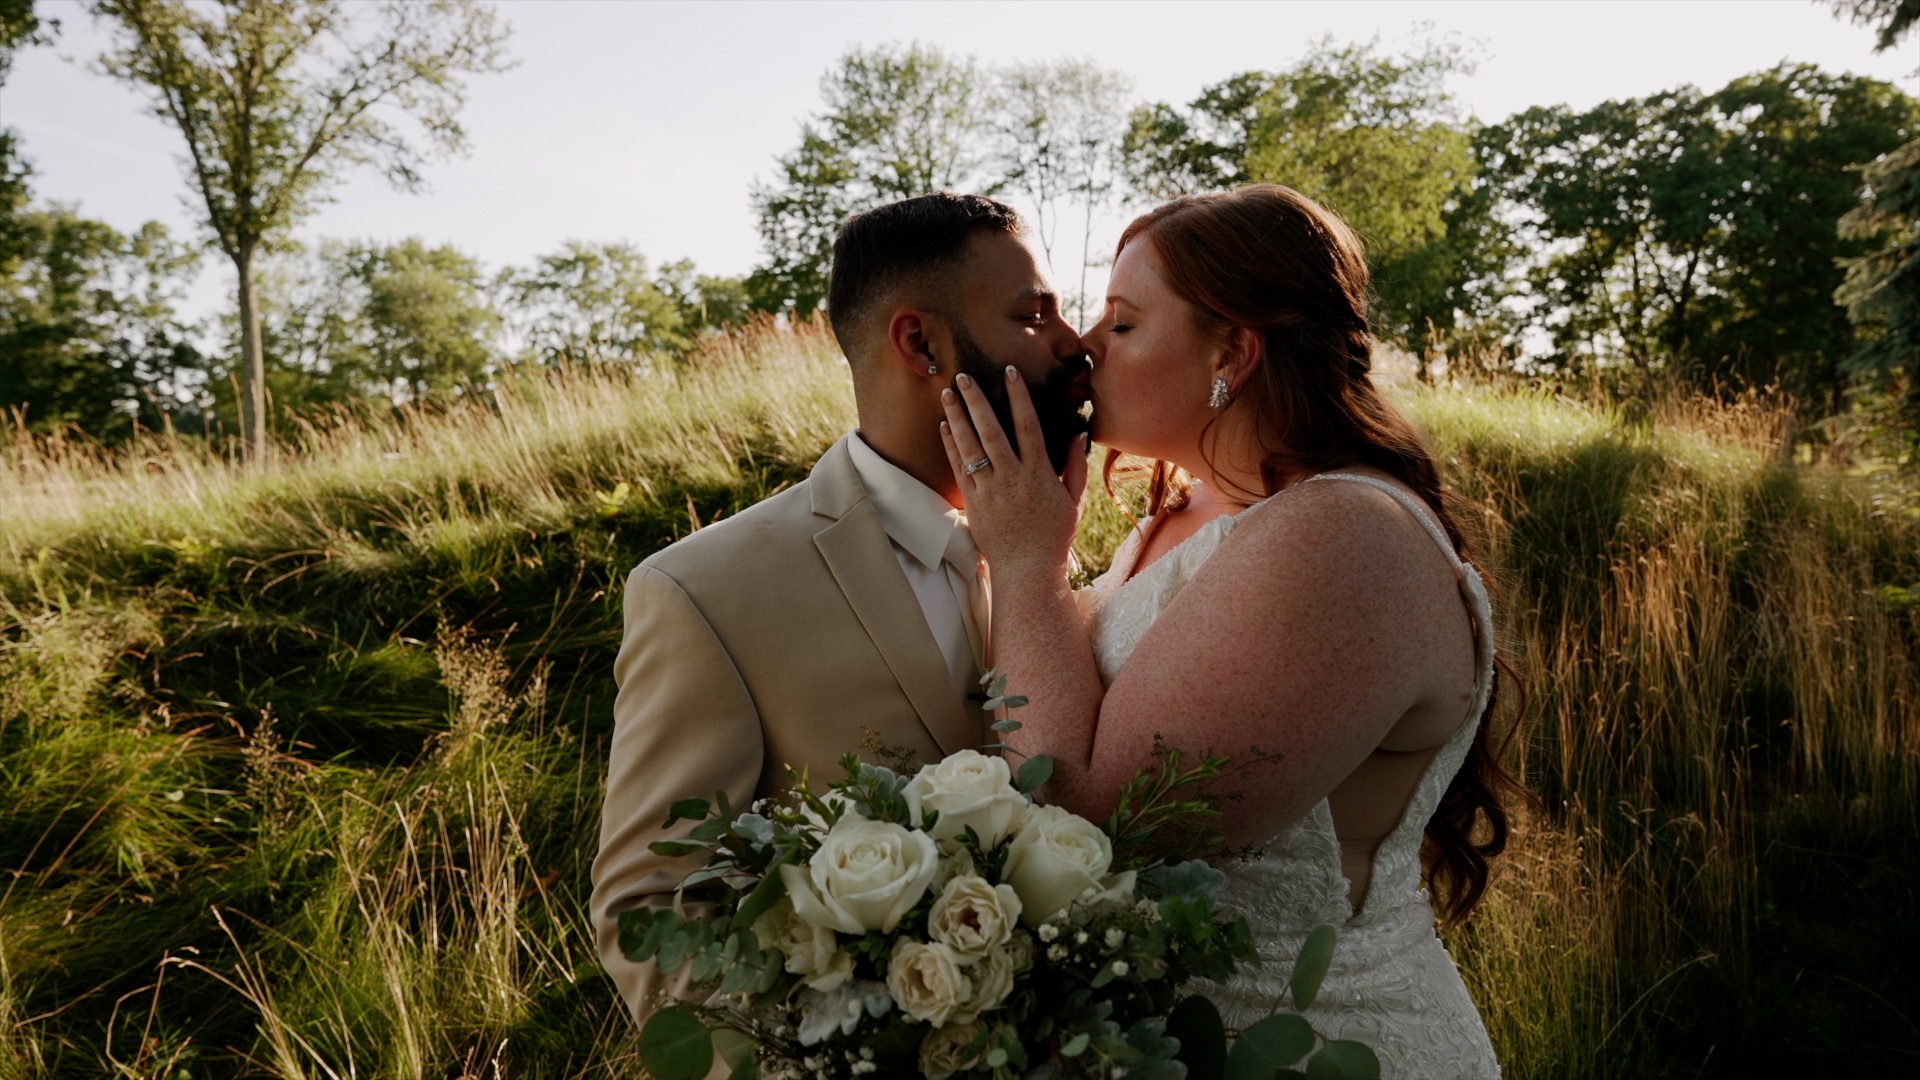 Couple kissing with a hill with tall grass and tree scattered in the background. The bride's left hand is touching the groom's right cheek. You can see the bride's wedding band and engagement ring. Groom is in a tan suit.